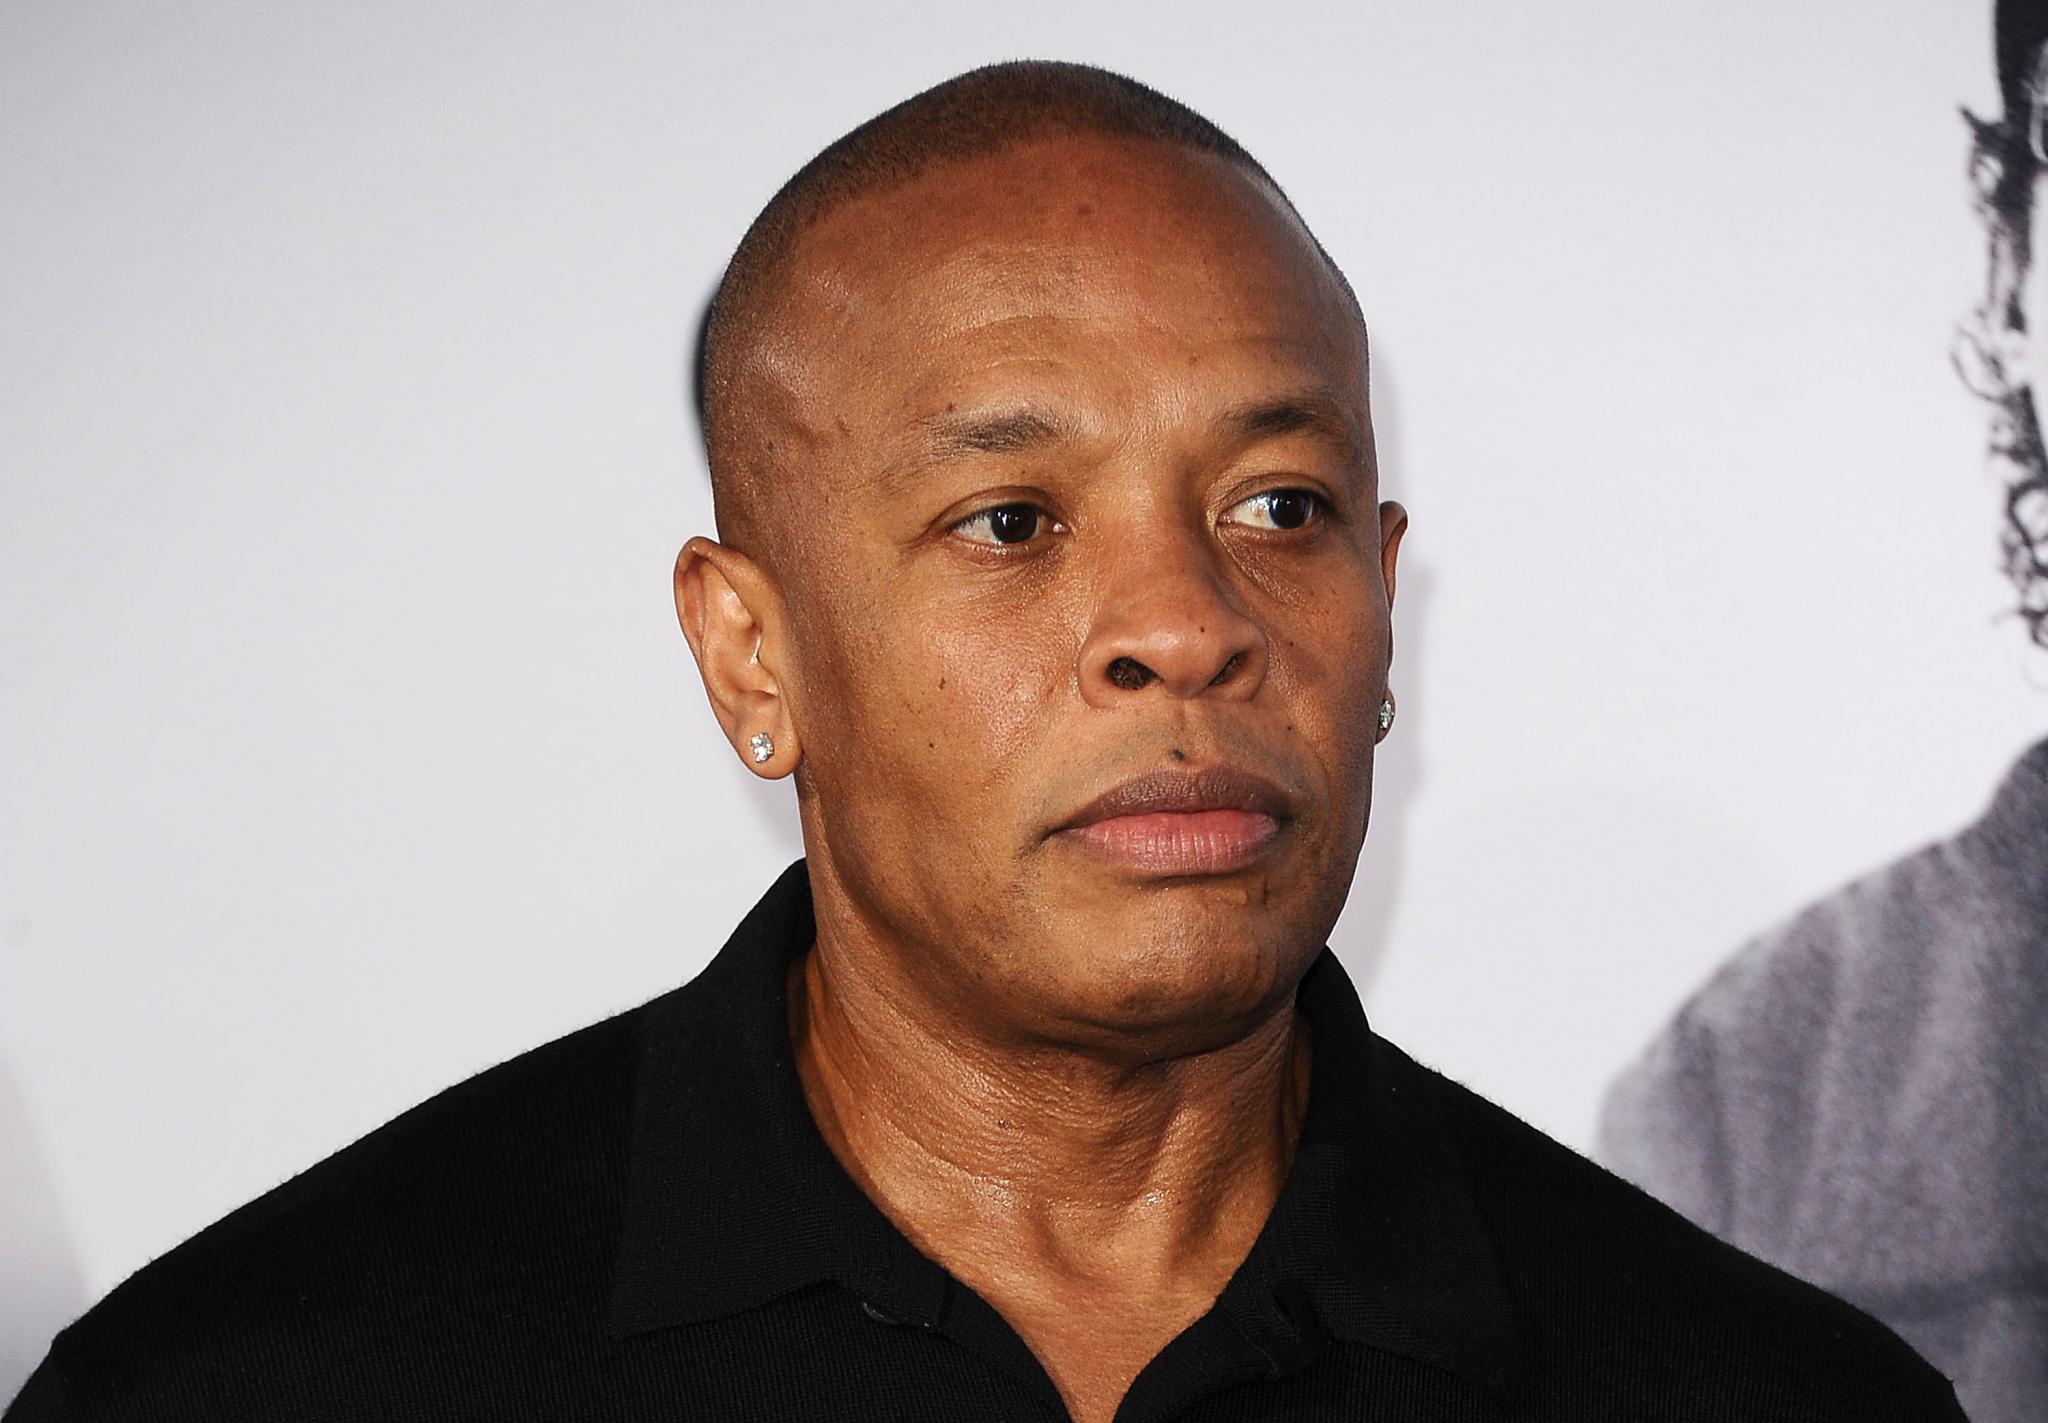 Michel'le, Dee Barnes Respond to Dr. Dre's Apology